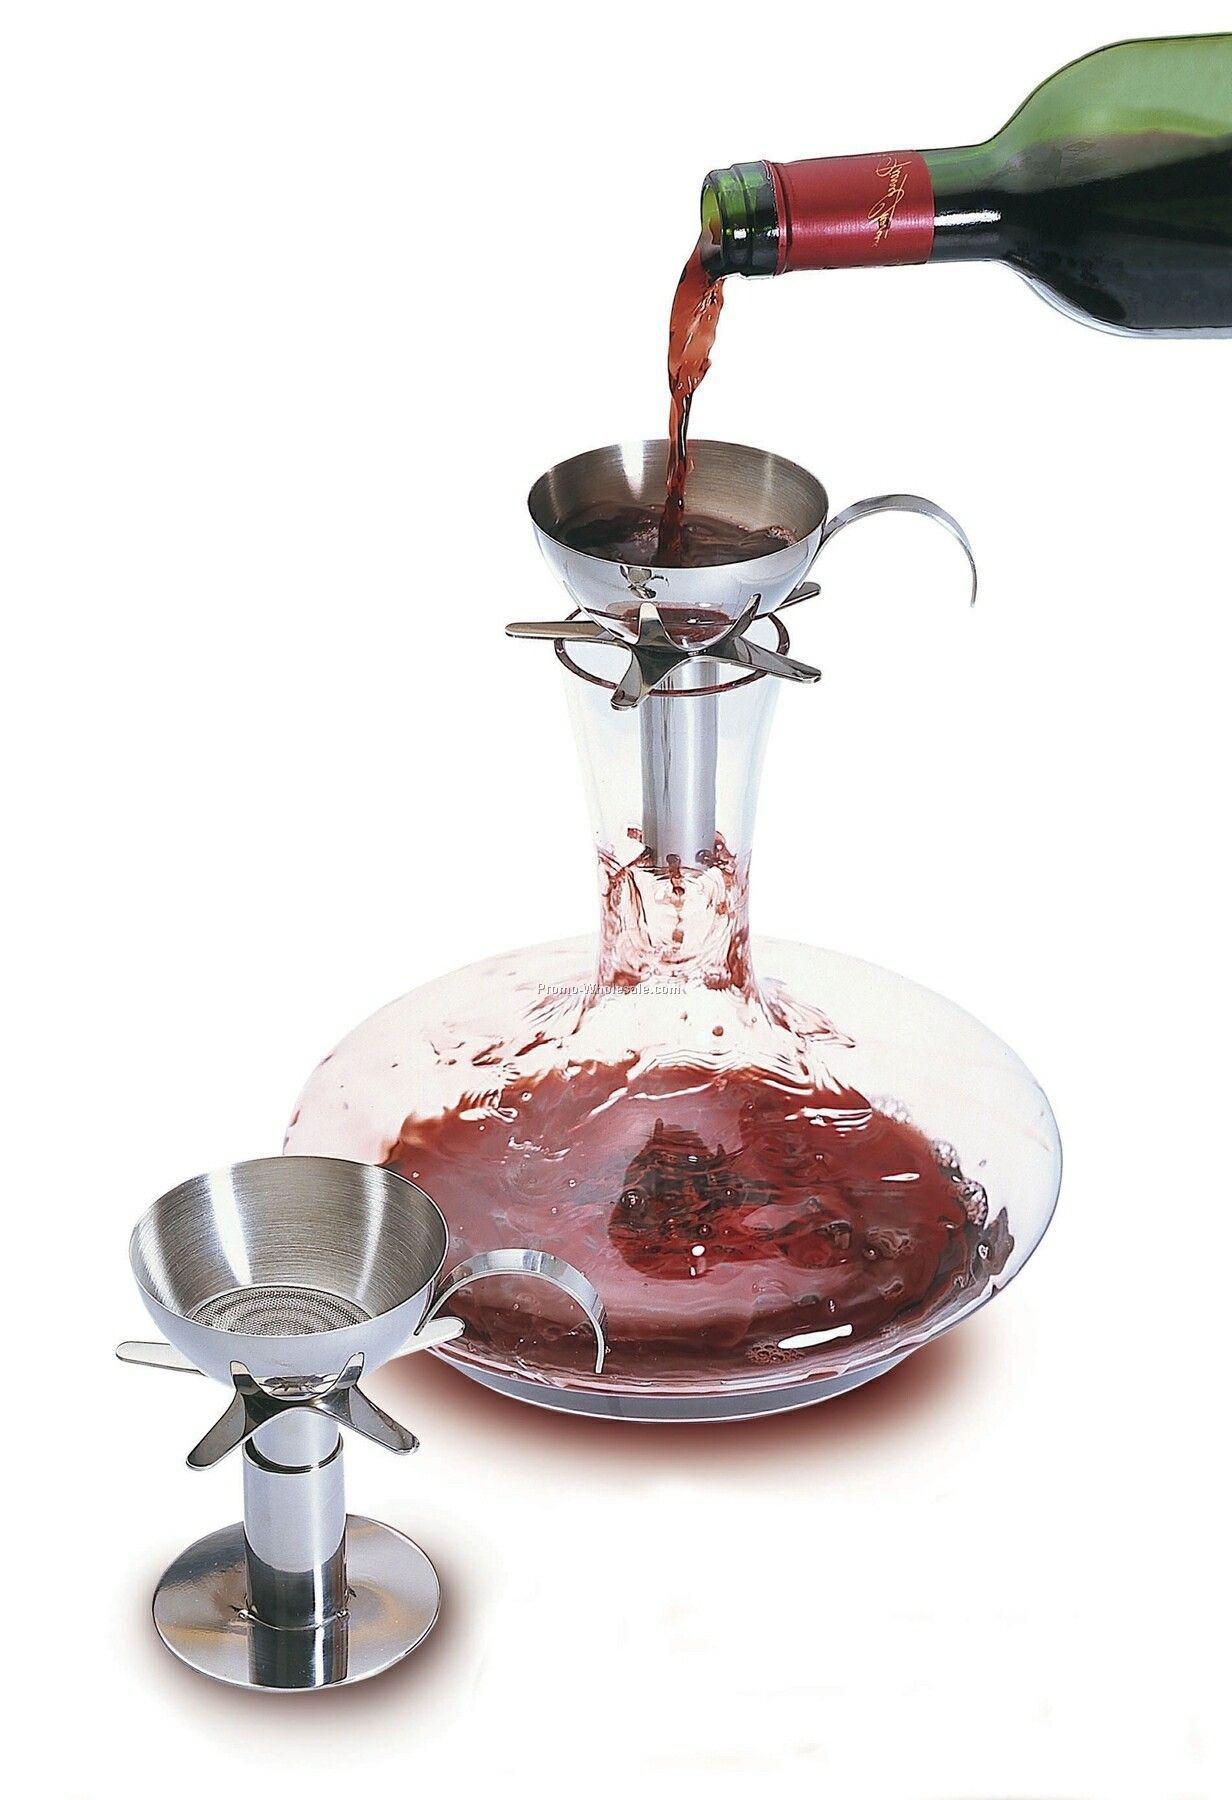 00-57-019_aerating-funnel-for-decanter_20090711318